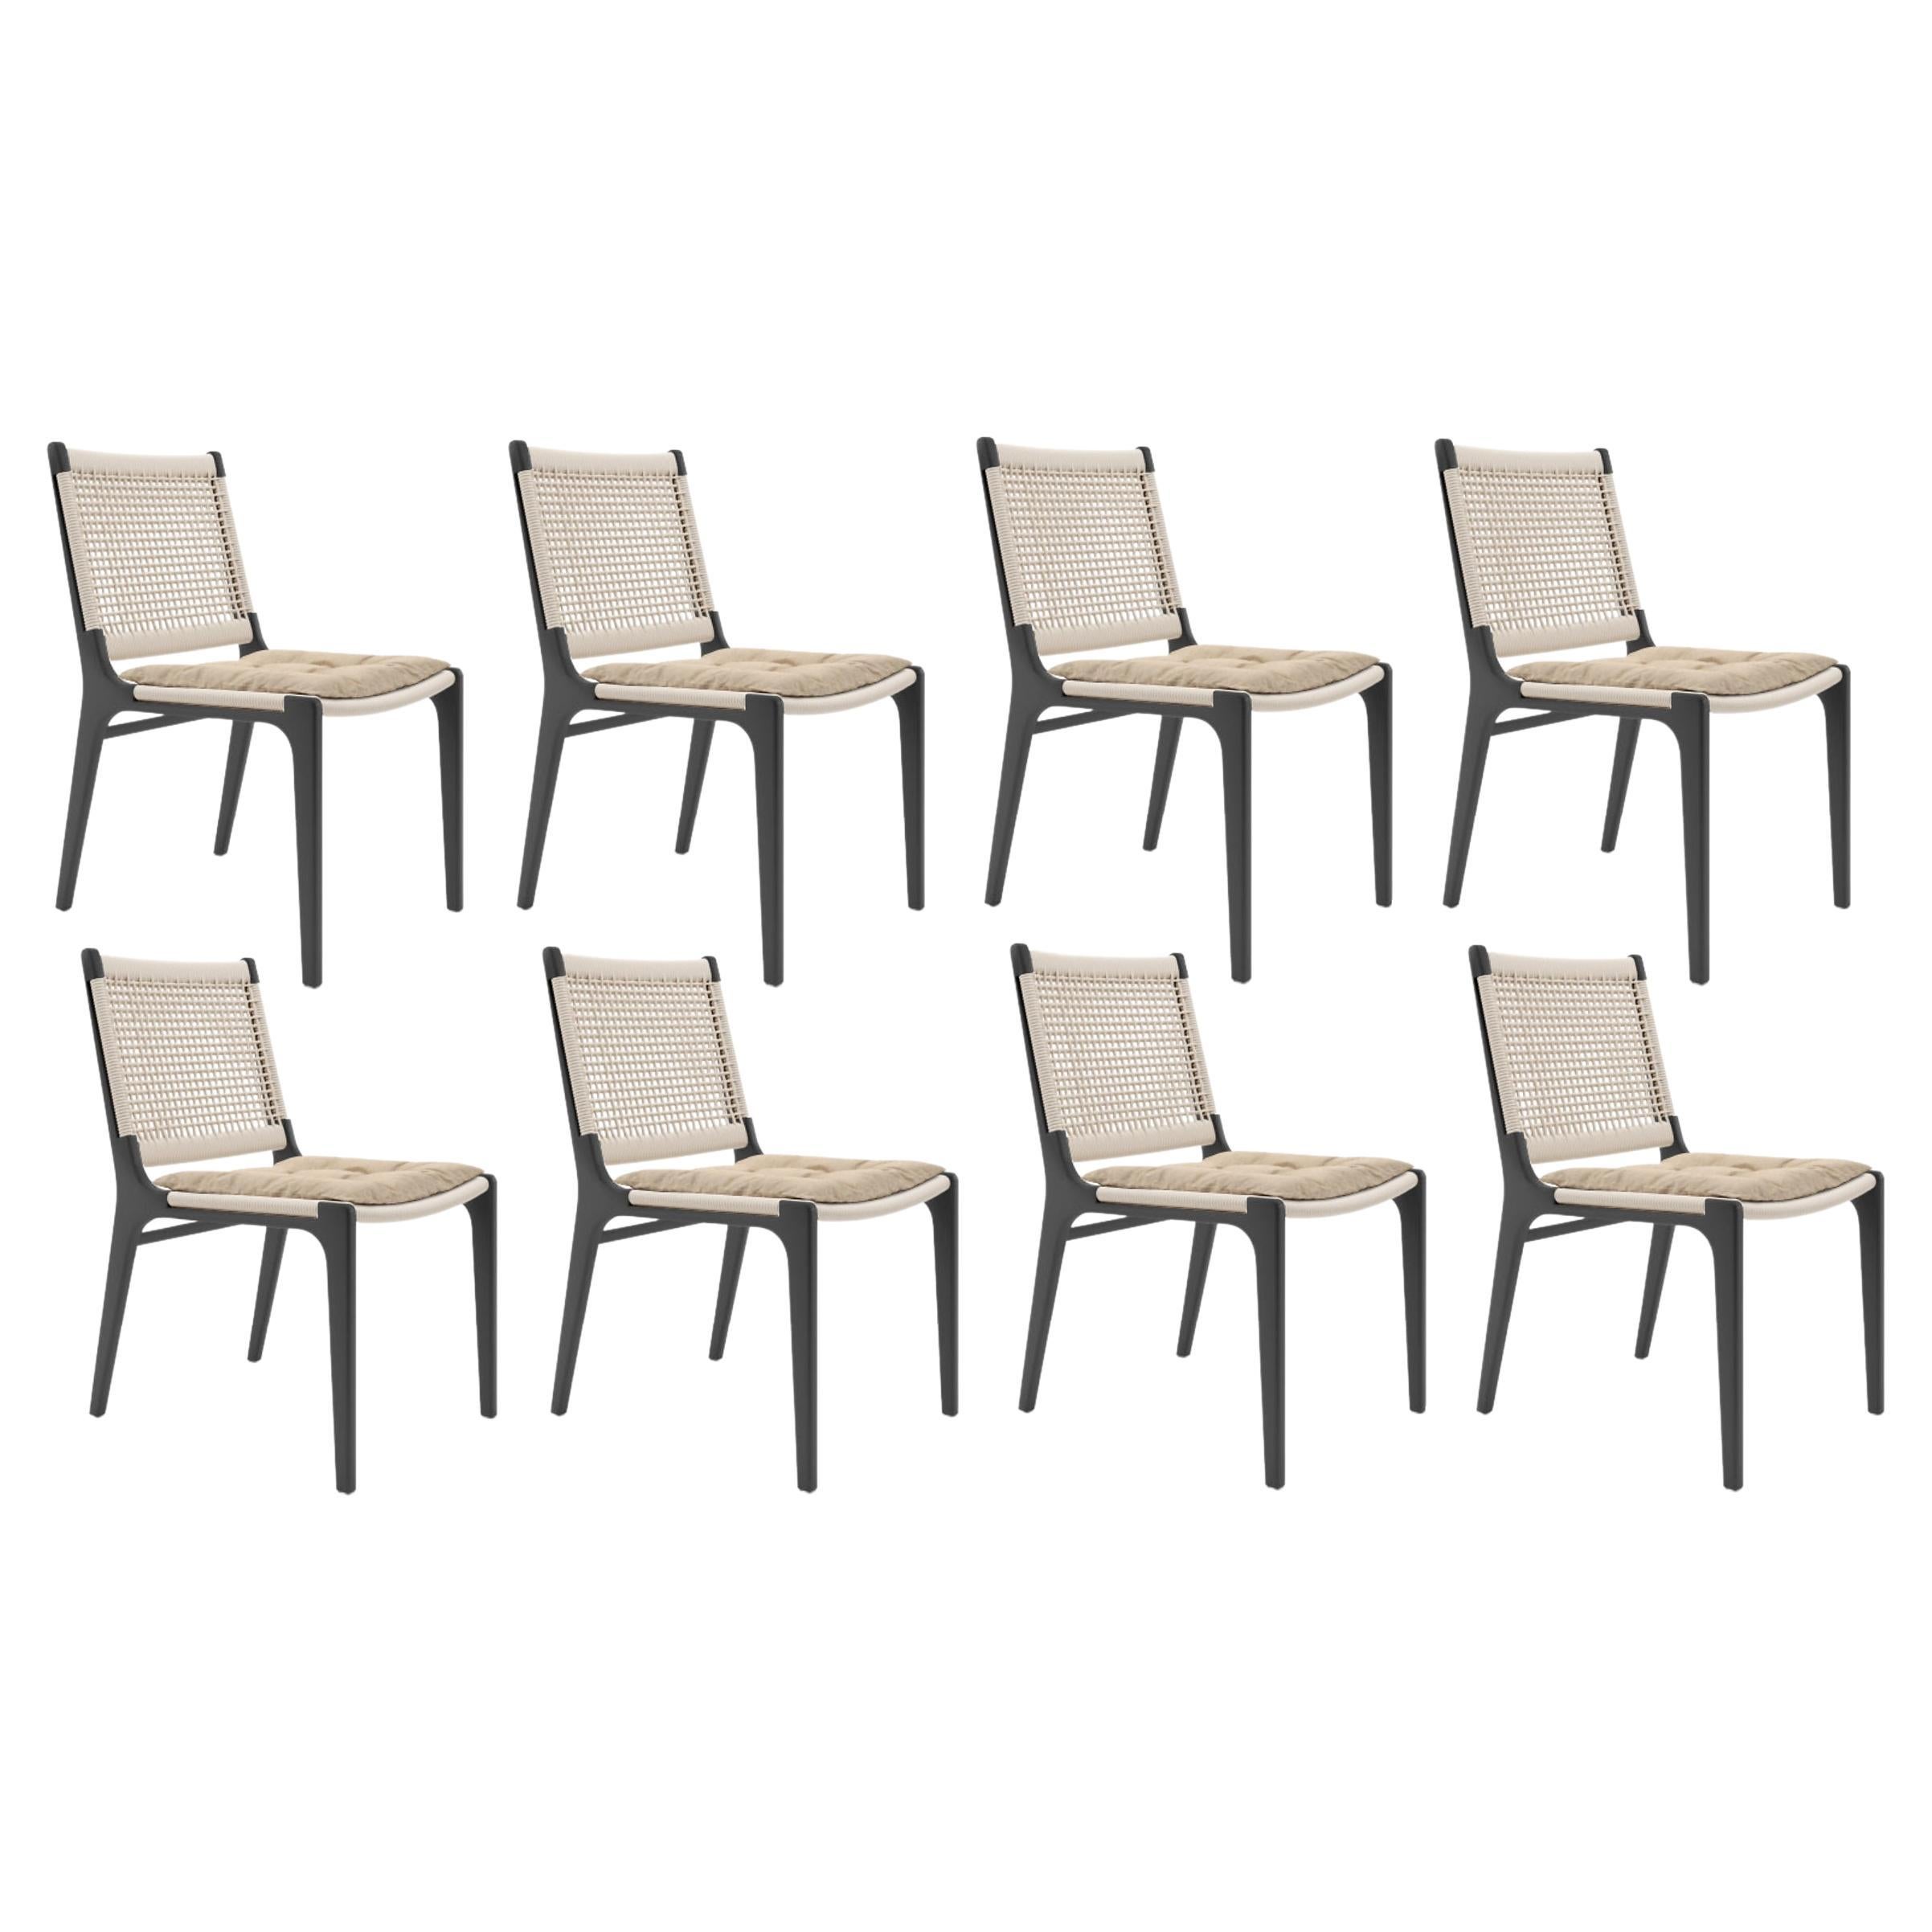 Outdoor Dining Chair With Rope Detailing/Set Of 8 For Sale